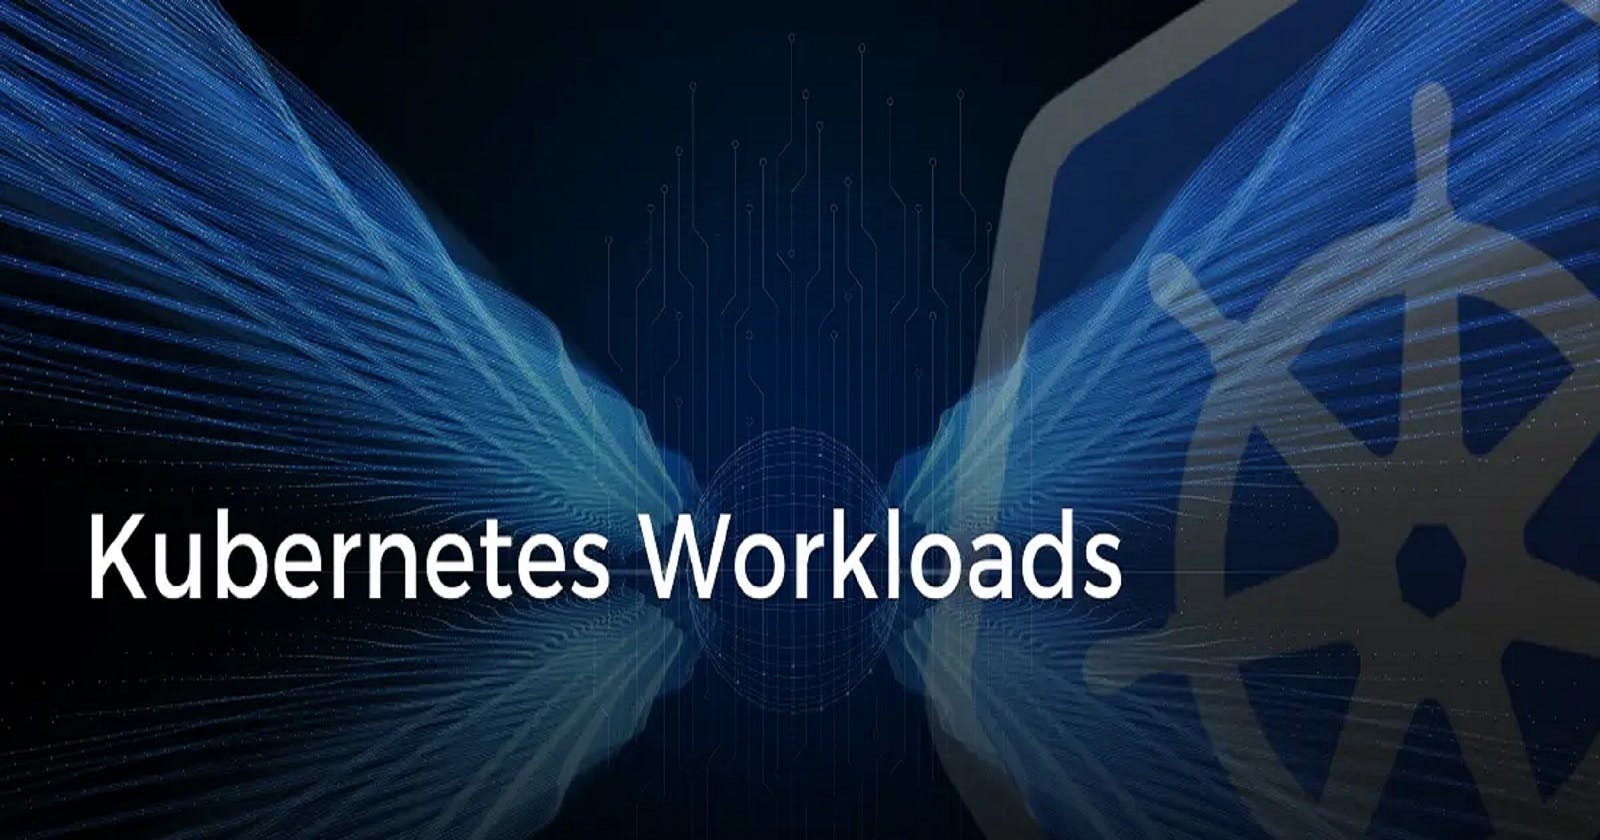 Kubernetes Workloads: A Comprehensive Guide to Deployments, StatefulSets, DaemonSets, Jobs, and CronJobs